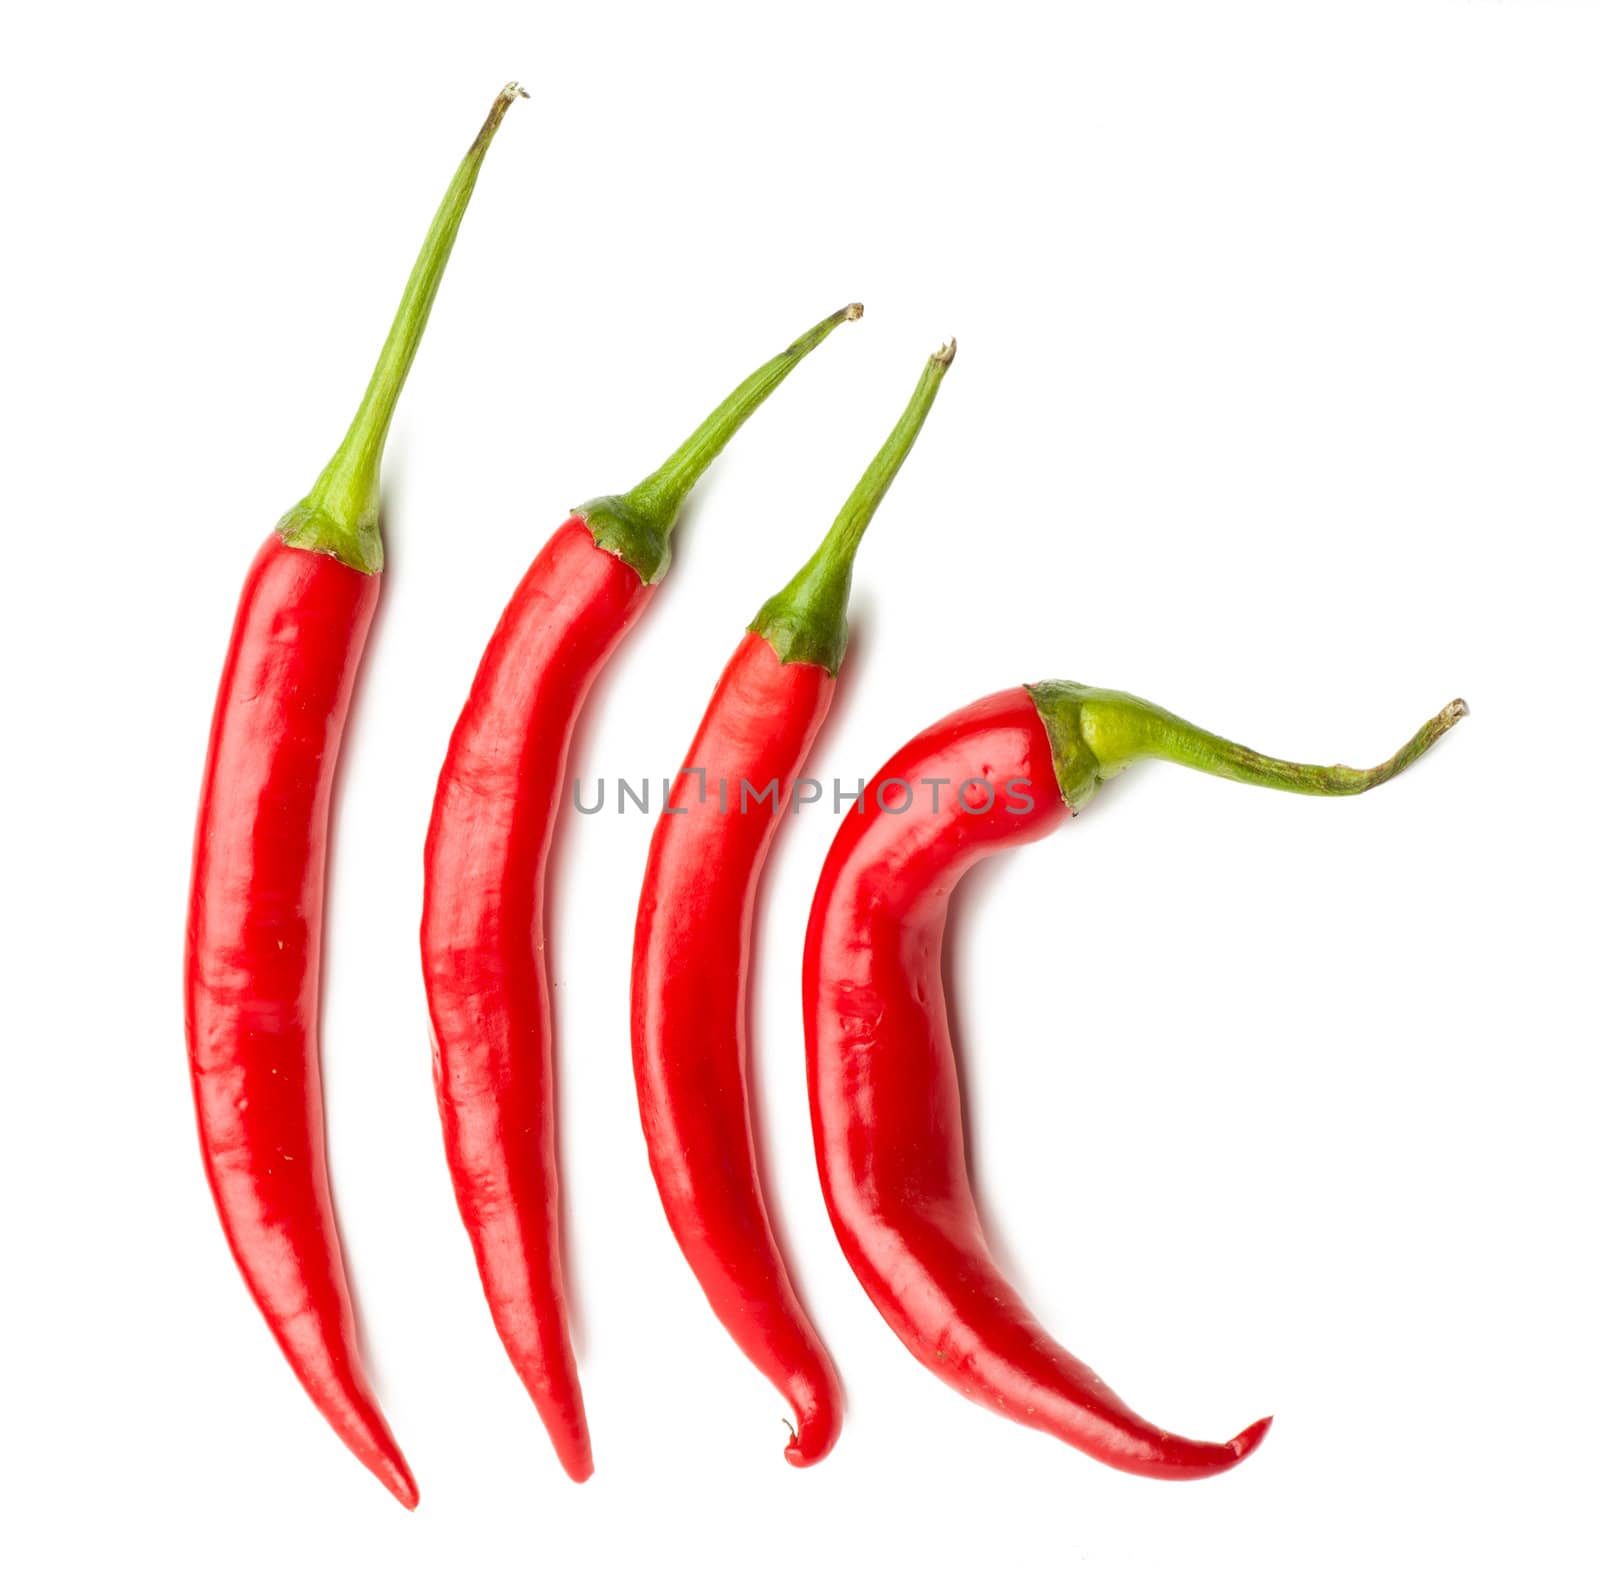 Four red chili peppers over white background